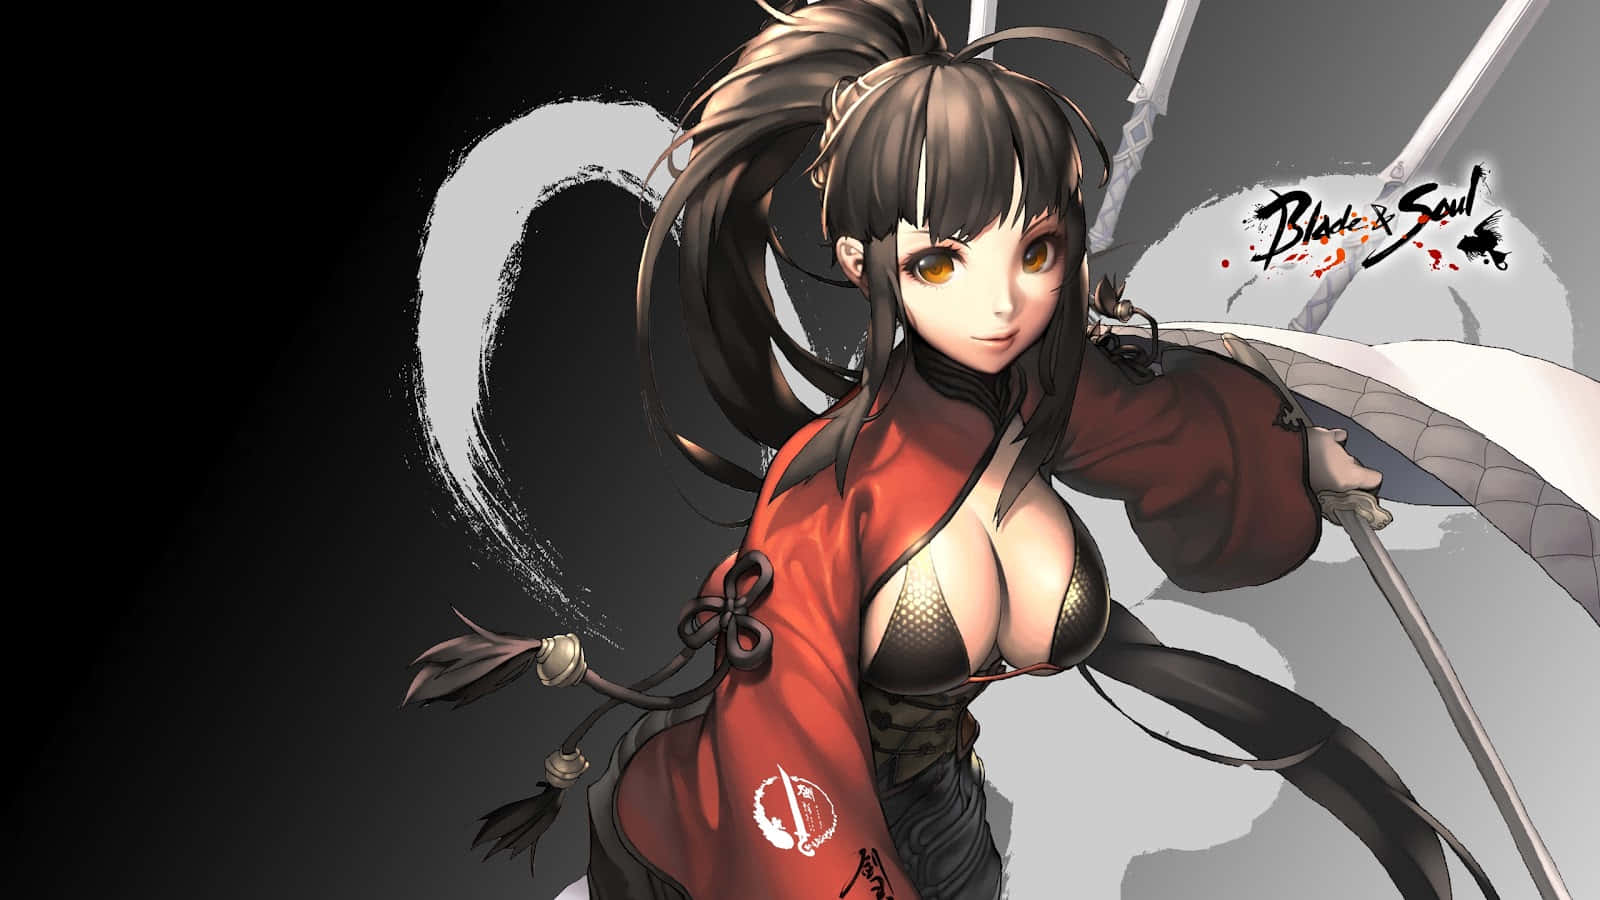 Assasin From Blade And Soul Anime Wallpaper